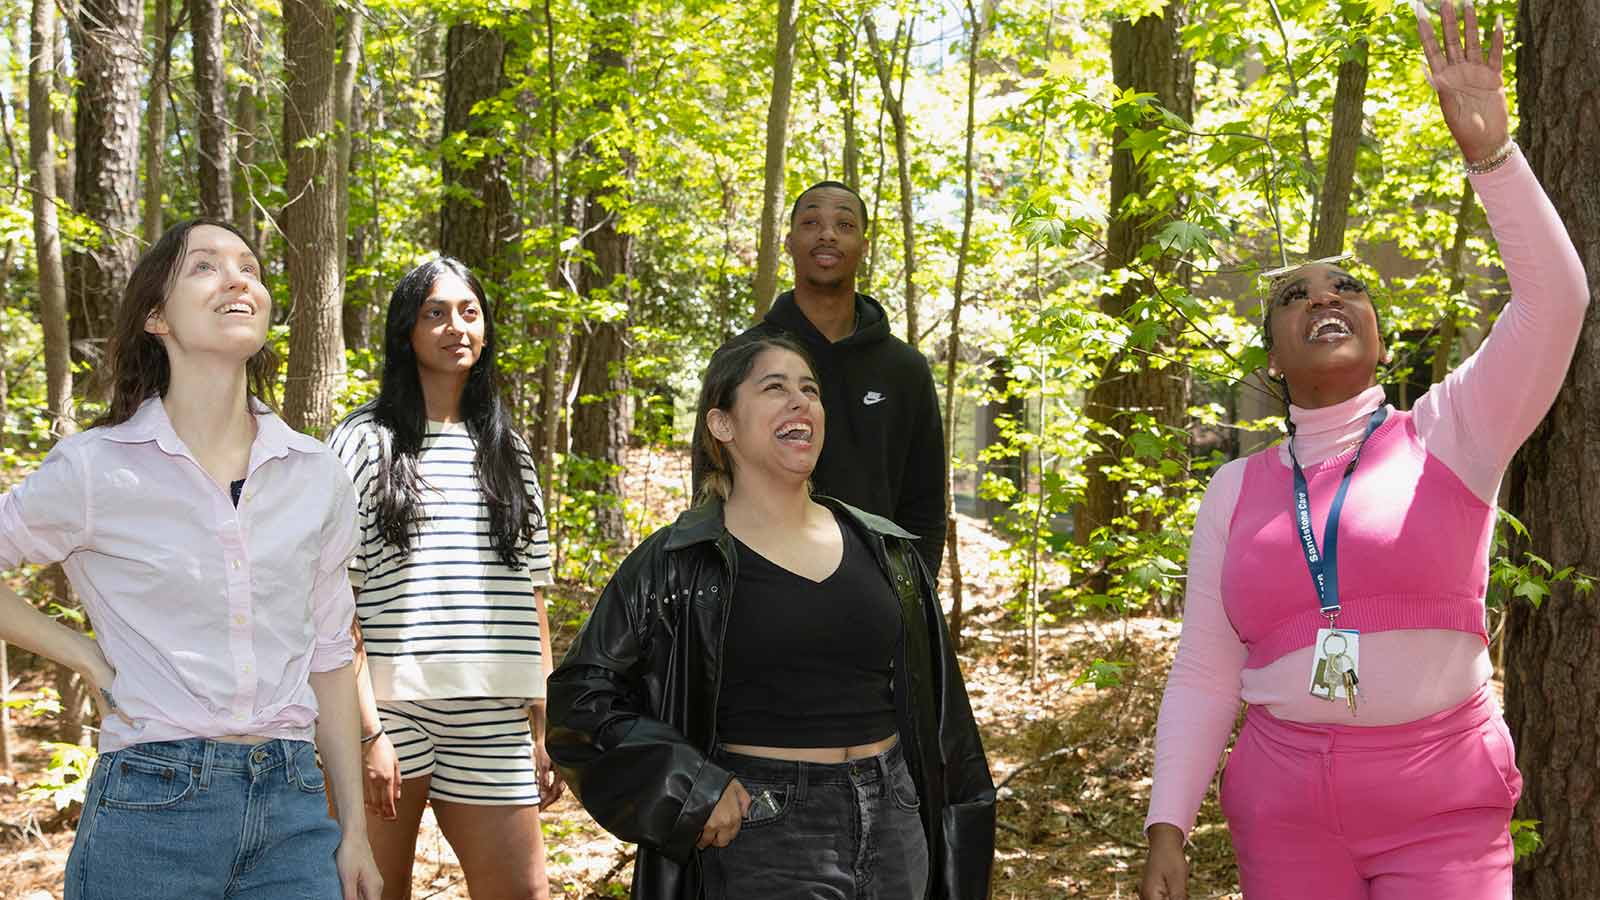 Four young adults and a professional going on a walk through the woods.